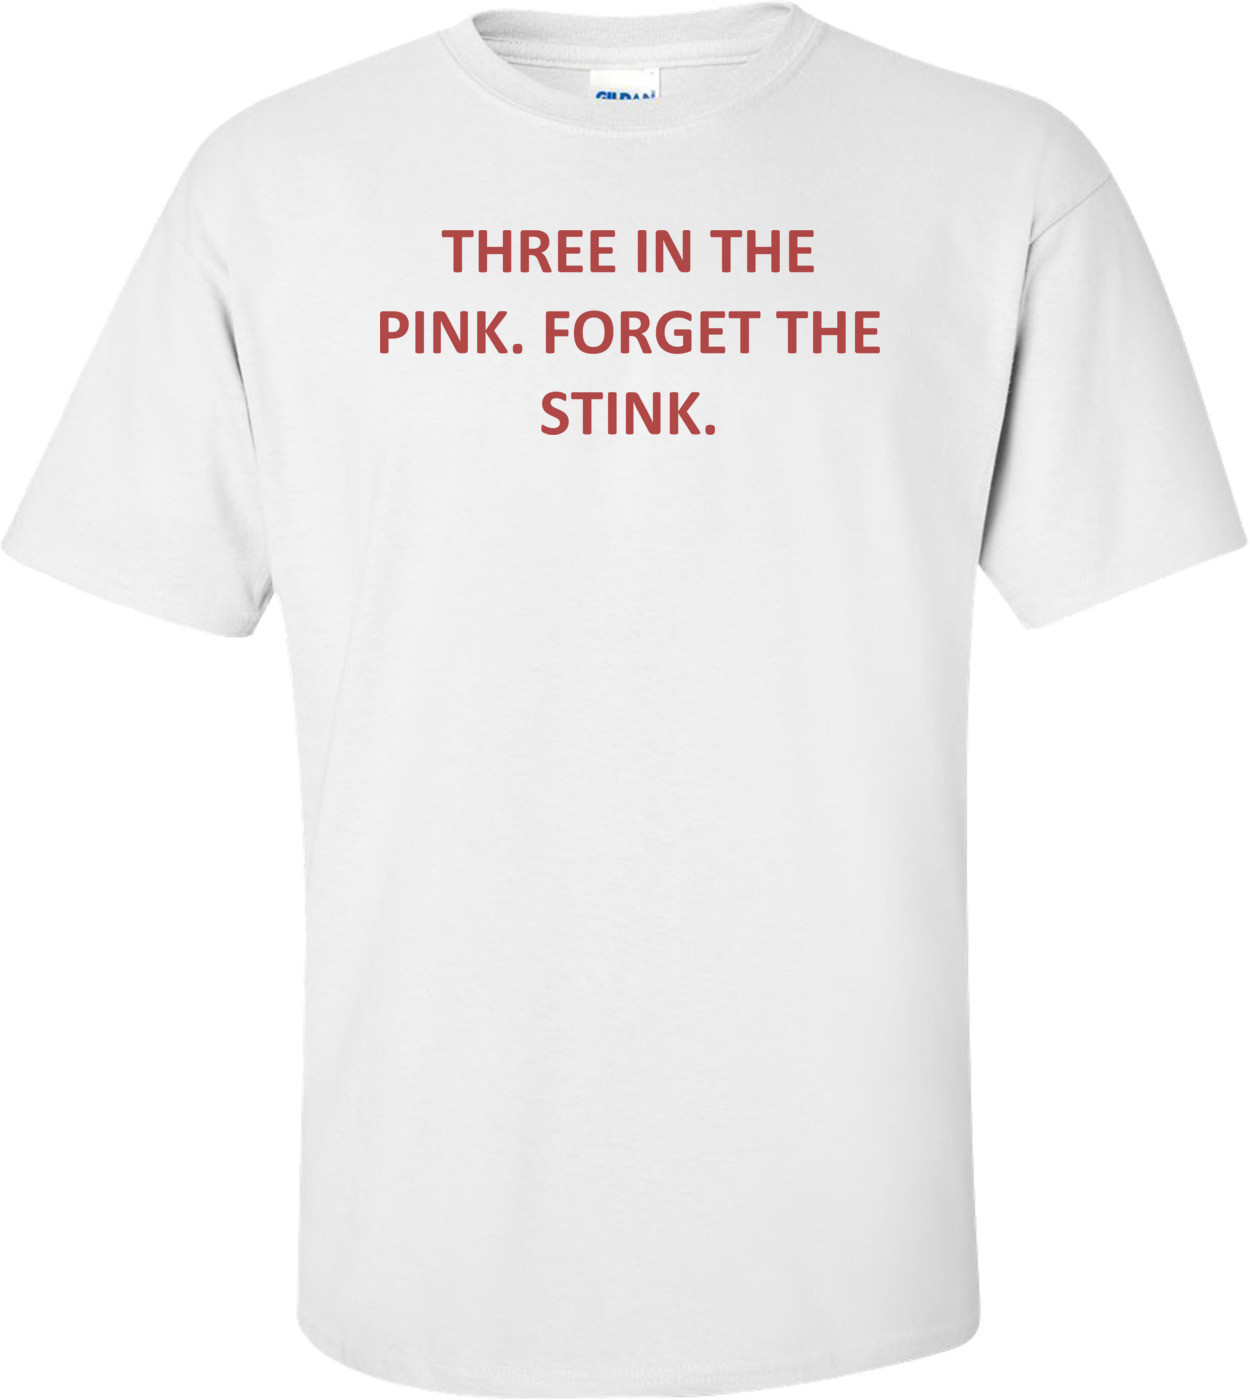 THREE IN THE PINK. FORGET THE STINK.